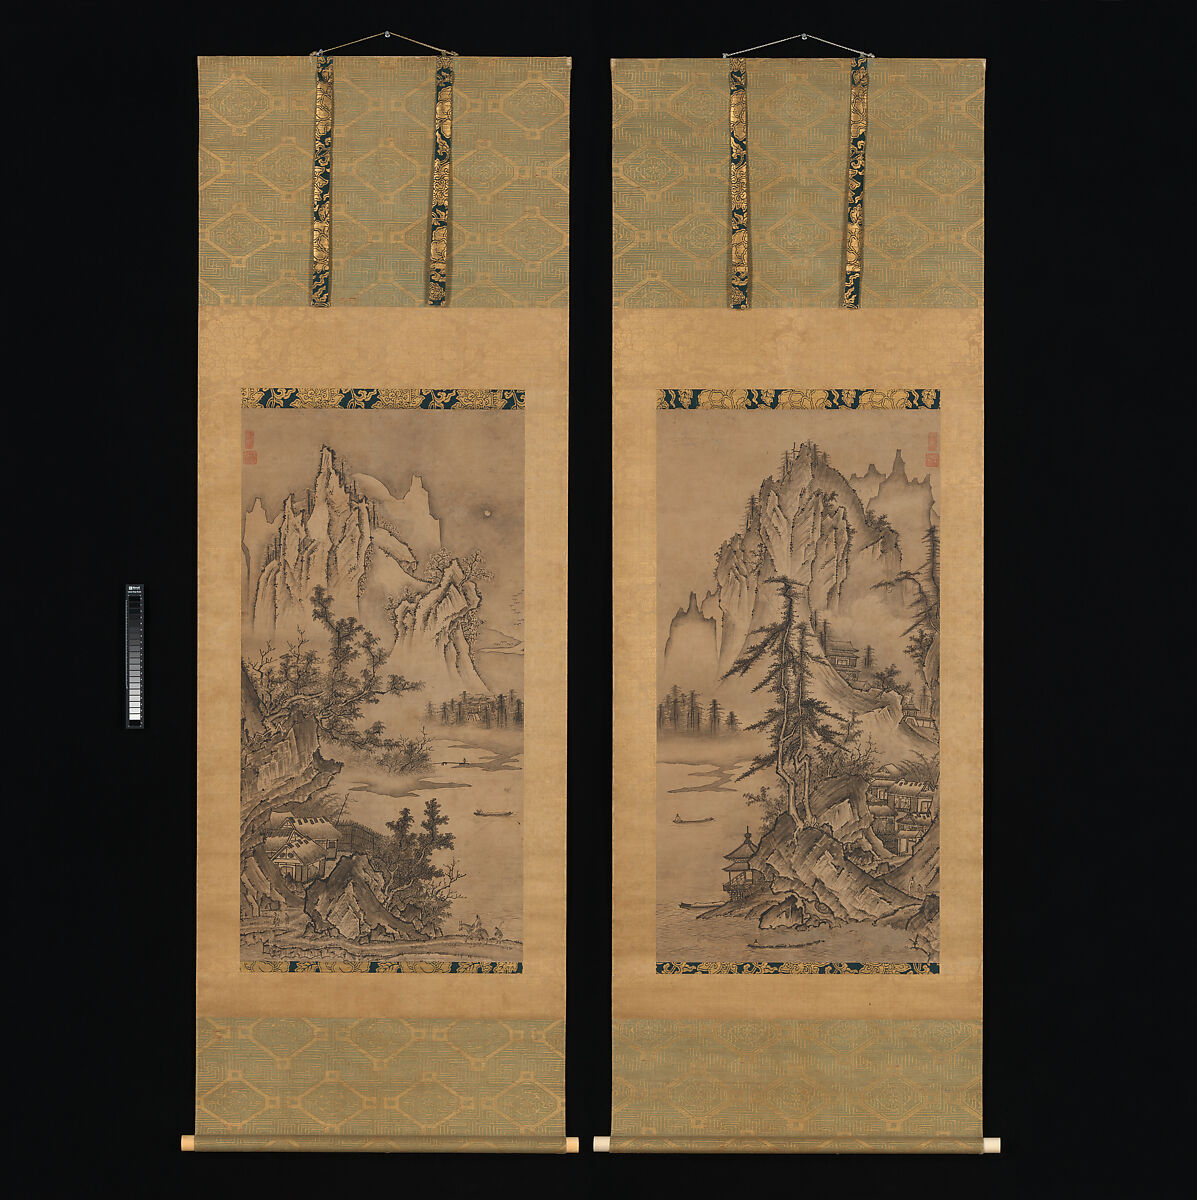 Landscapes of the Four Seasons, Keison, Pair of hanging scrolls; ink on paper, Japan